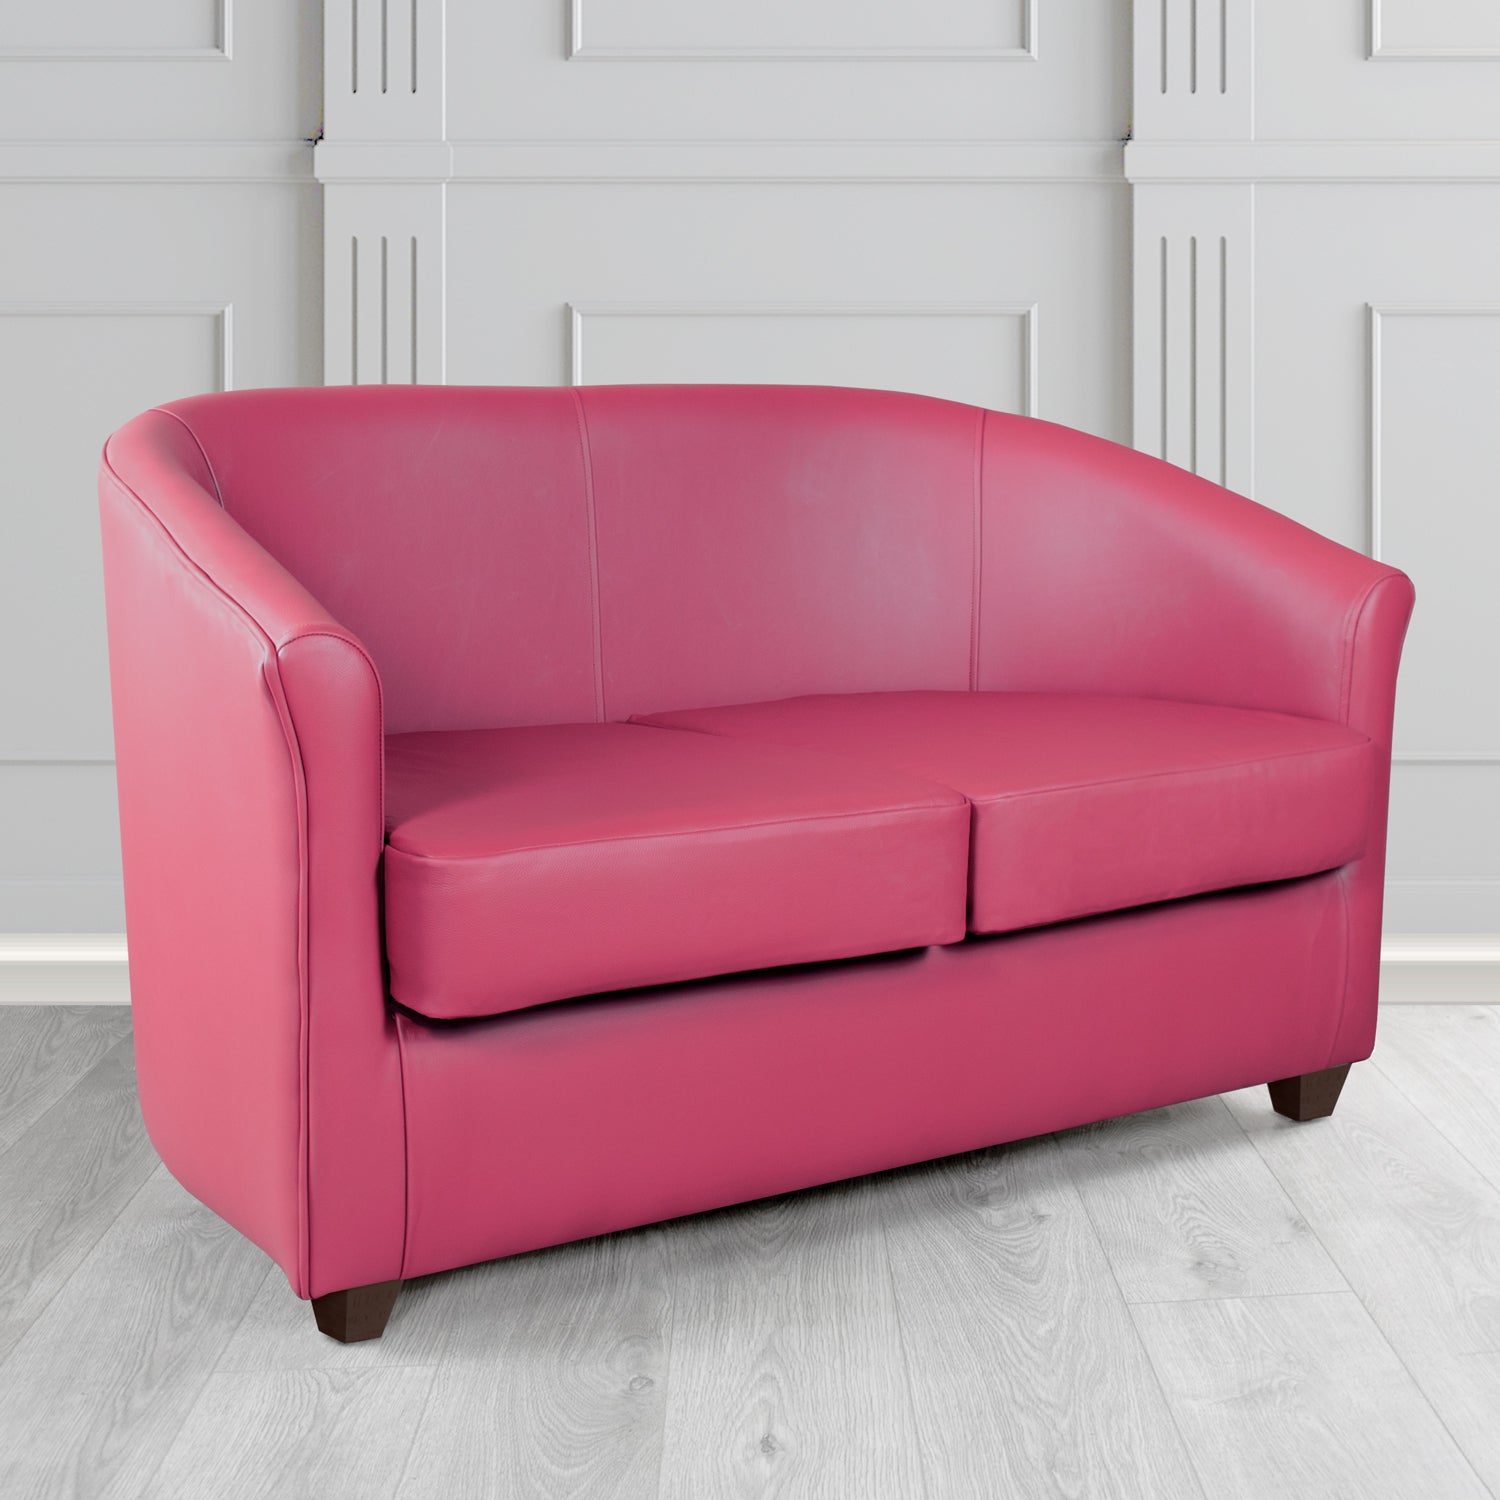 Cannes 2 Seater Tub Sofa in Just Colour Deep Rose Crib 5 Faux Leather - The Tub Chair Shop